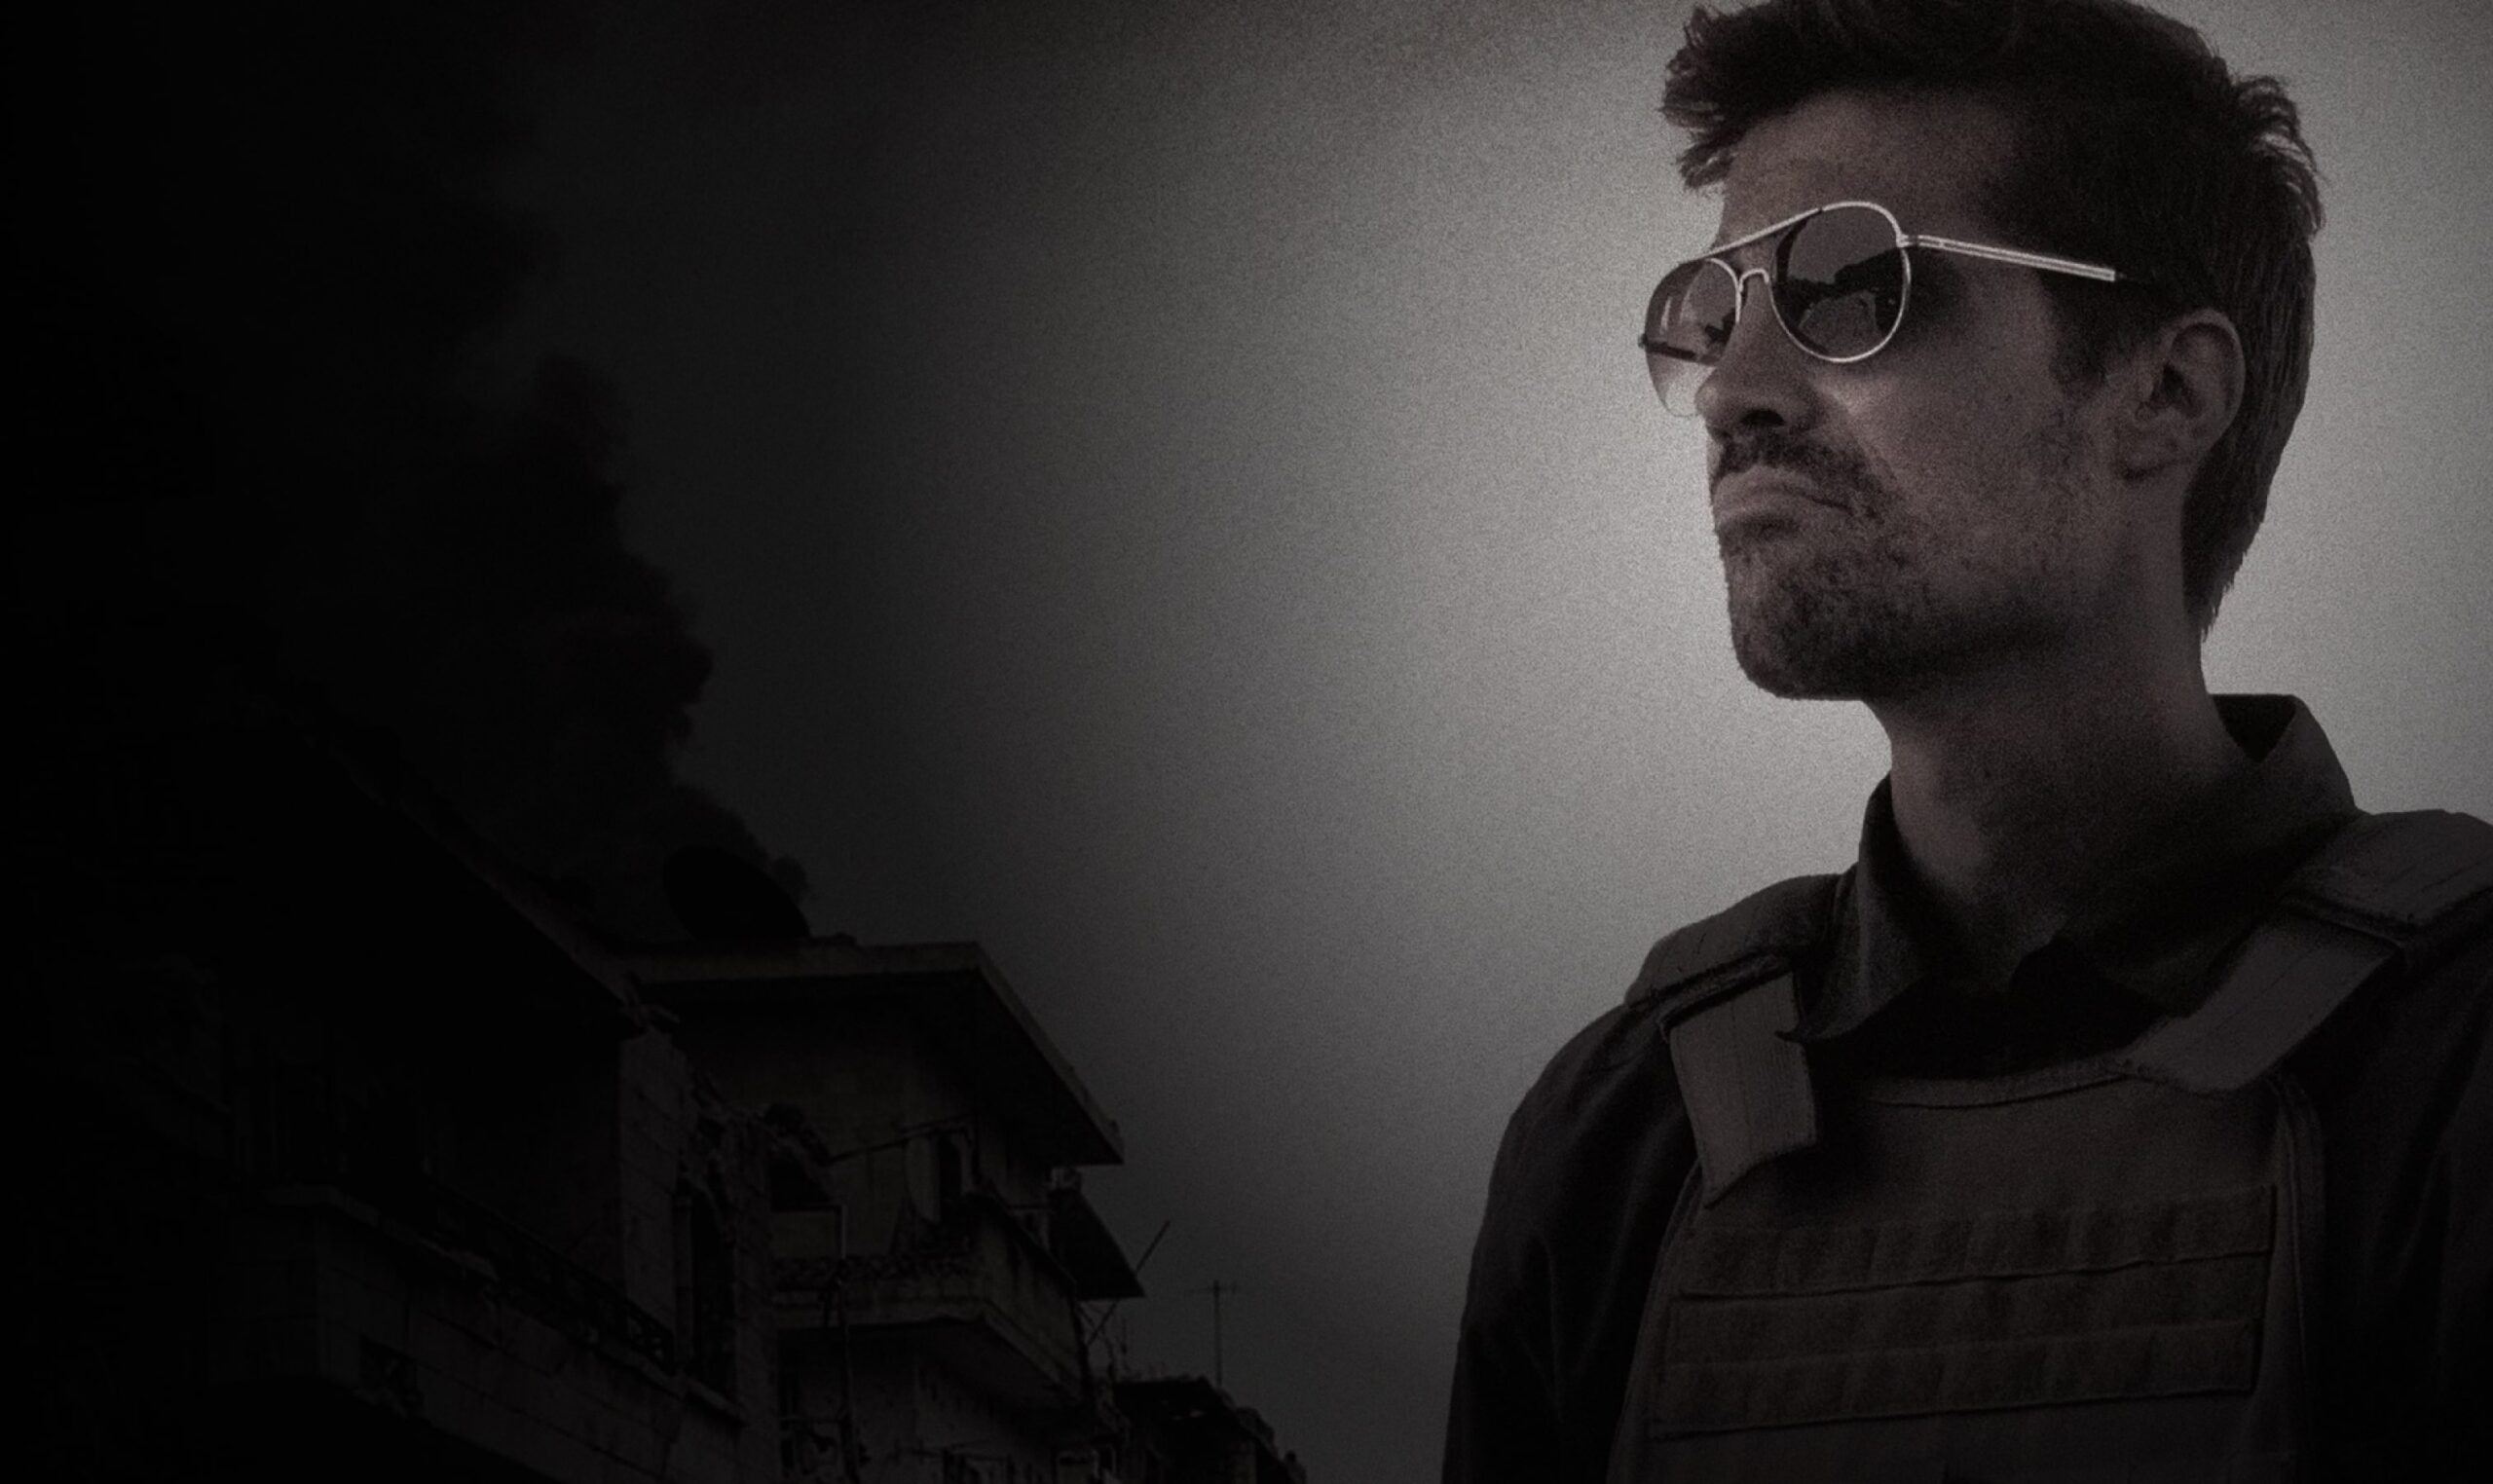 Image of Jim Foley and the foundation's tagline, Inspiring moral courage, one person at a time